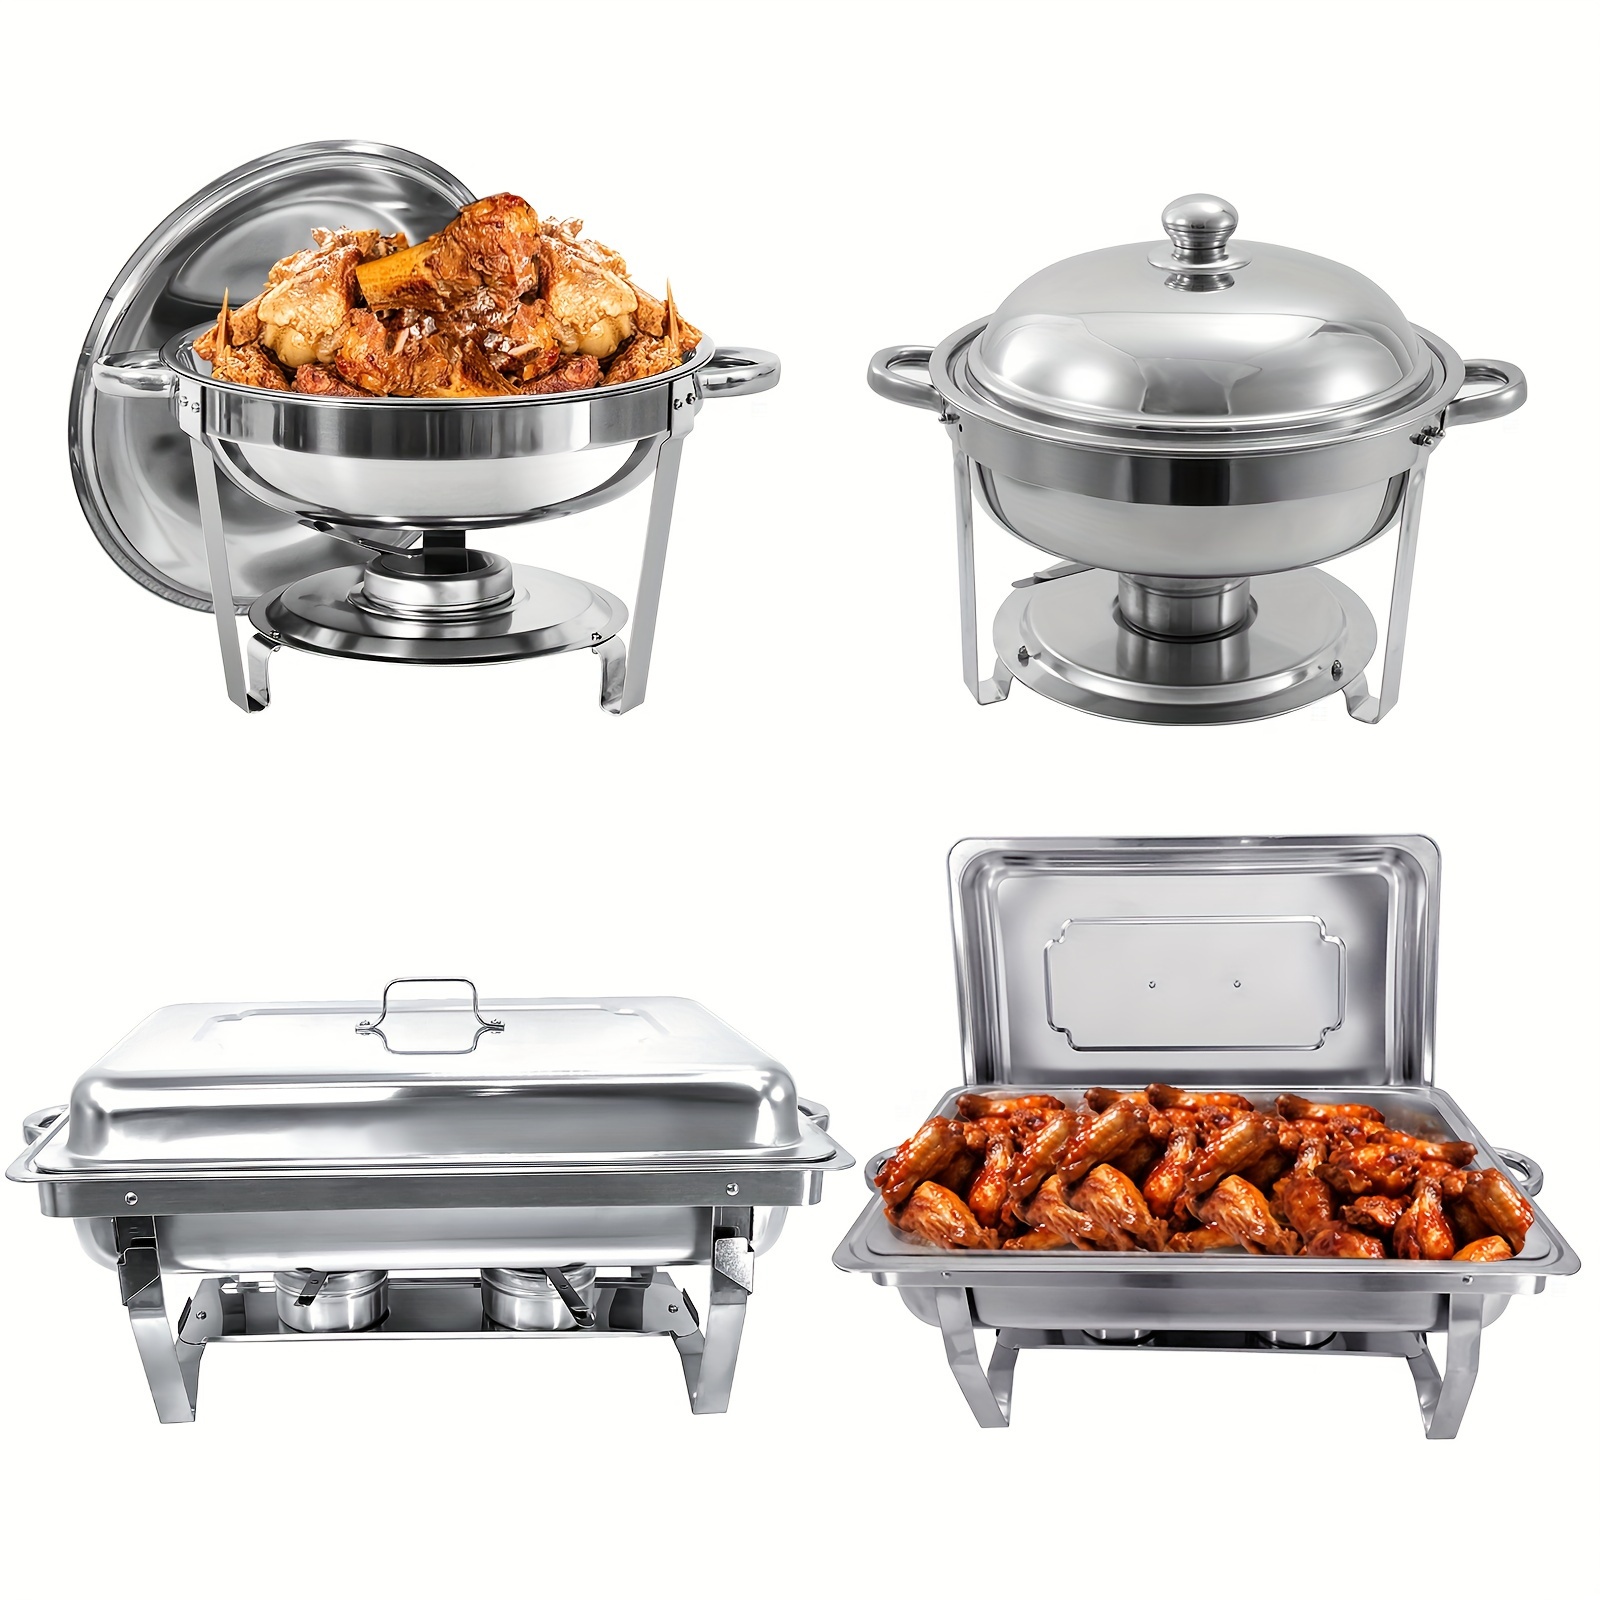 

4 Packs Chafing Dish Buffet Set, Stainless Steel Food Warmer Sets For Restaurant Catering Parties Weddings (2 Packs 8qt Rectangular+2 Packs 6qt Round)